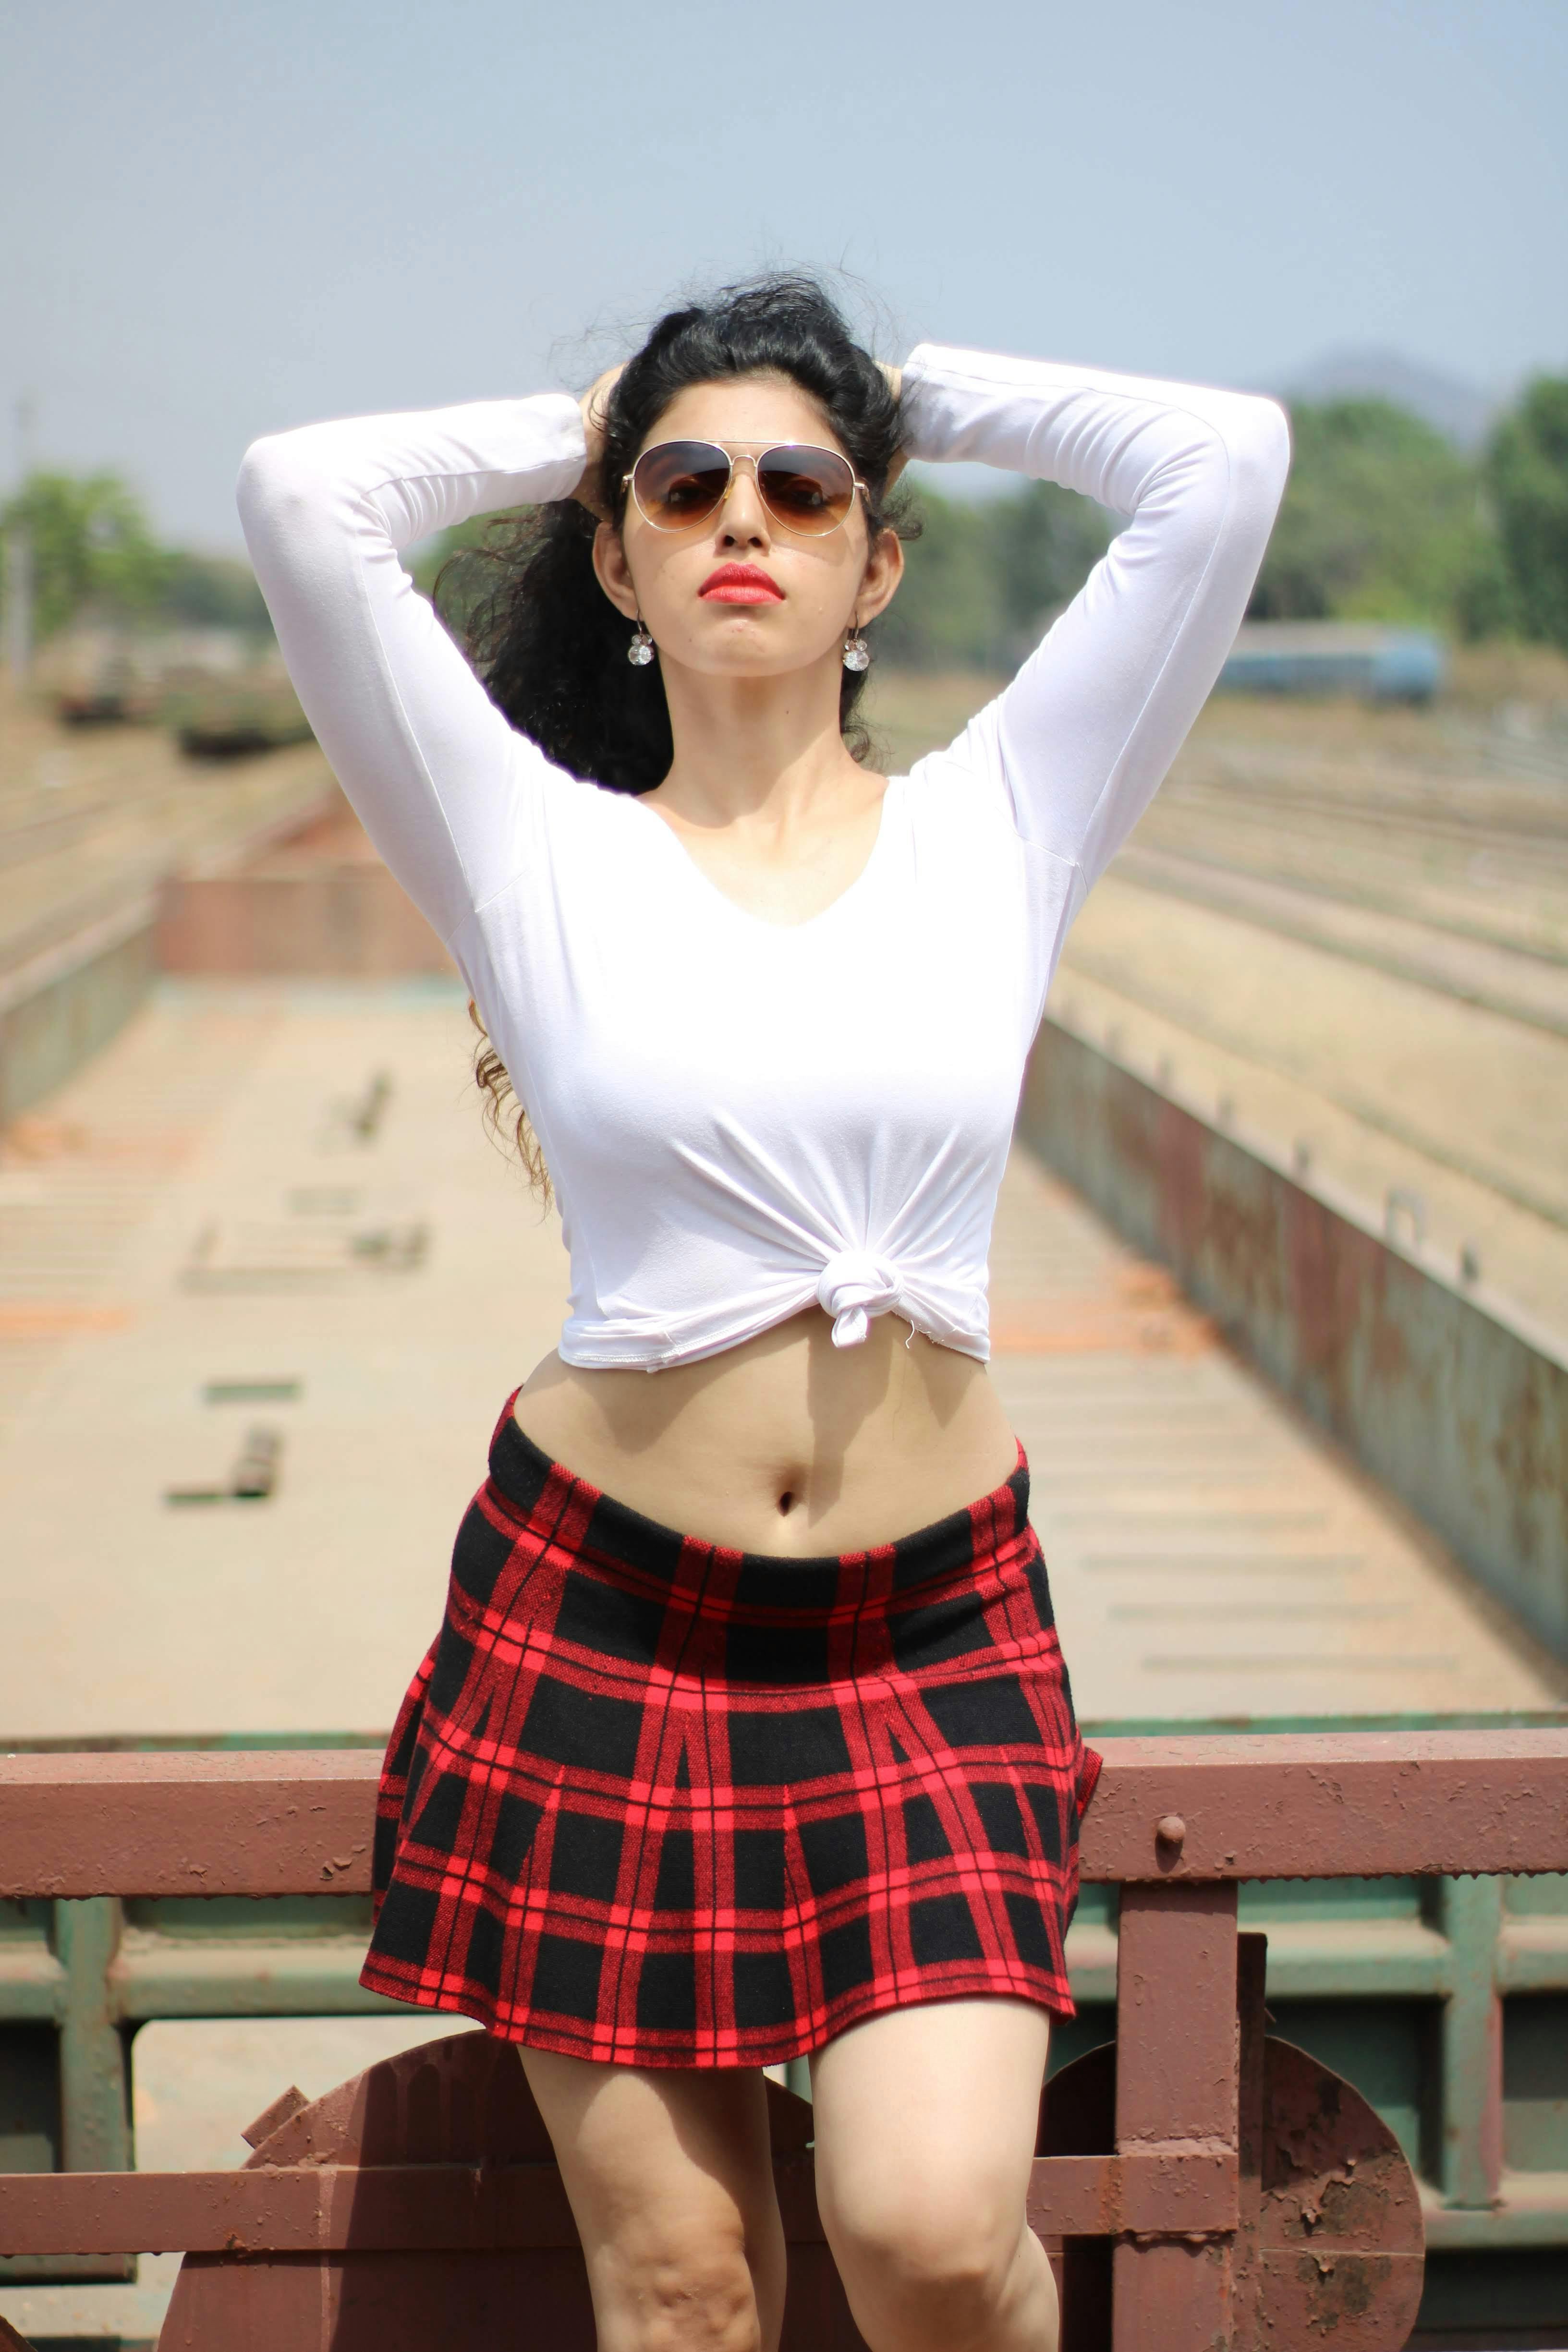 Woman in White Long Sleeve Top Red and Black Plaid Sunglasses · Free Stock Photo